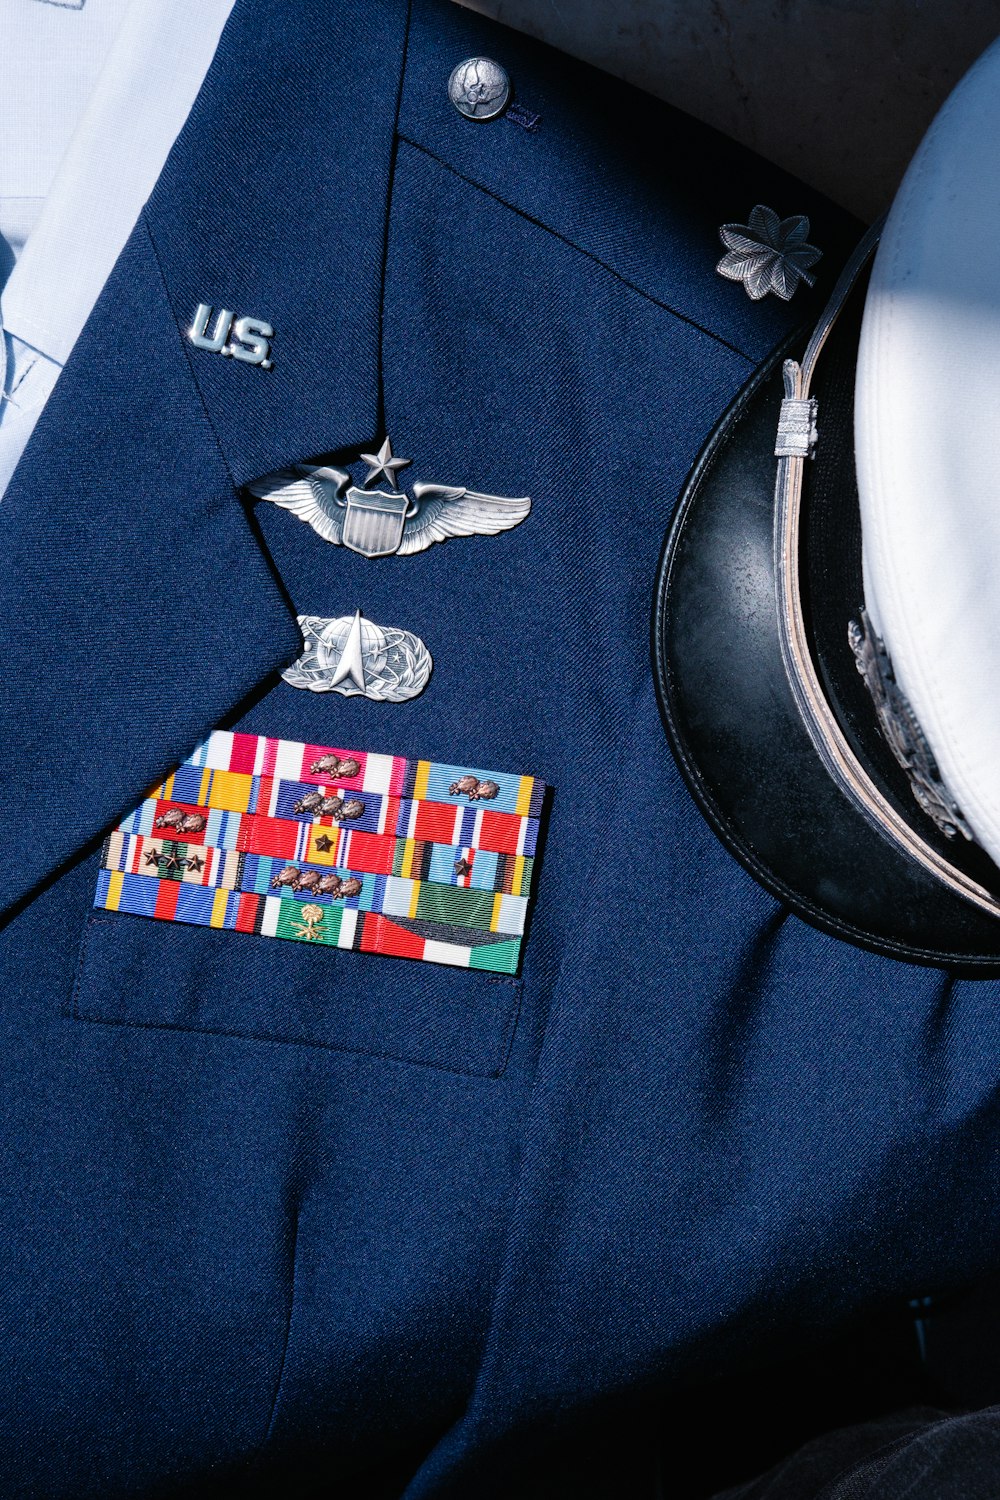 a close up of a uniform with a medal on it